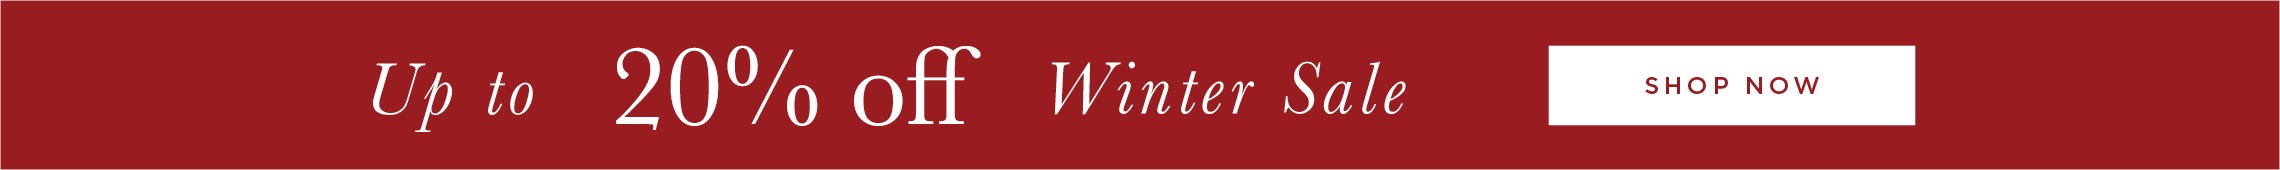 Up to 20% off winter sale - shop now